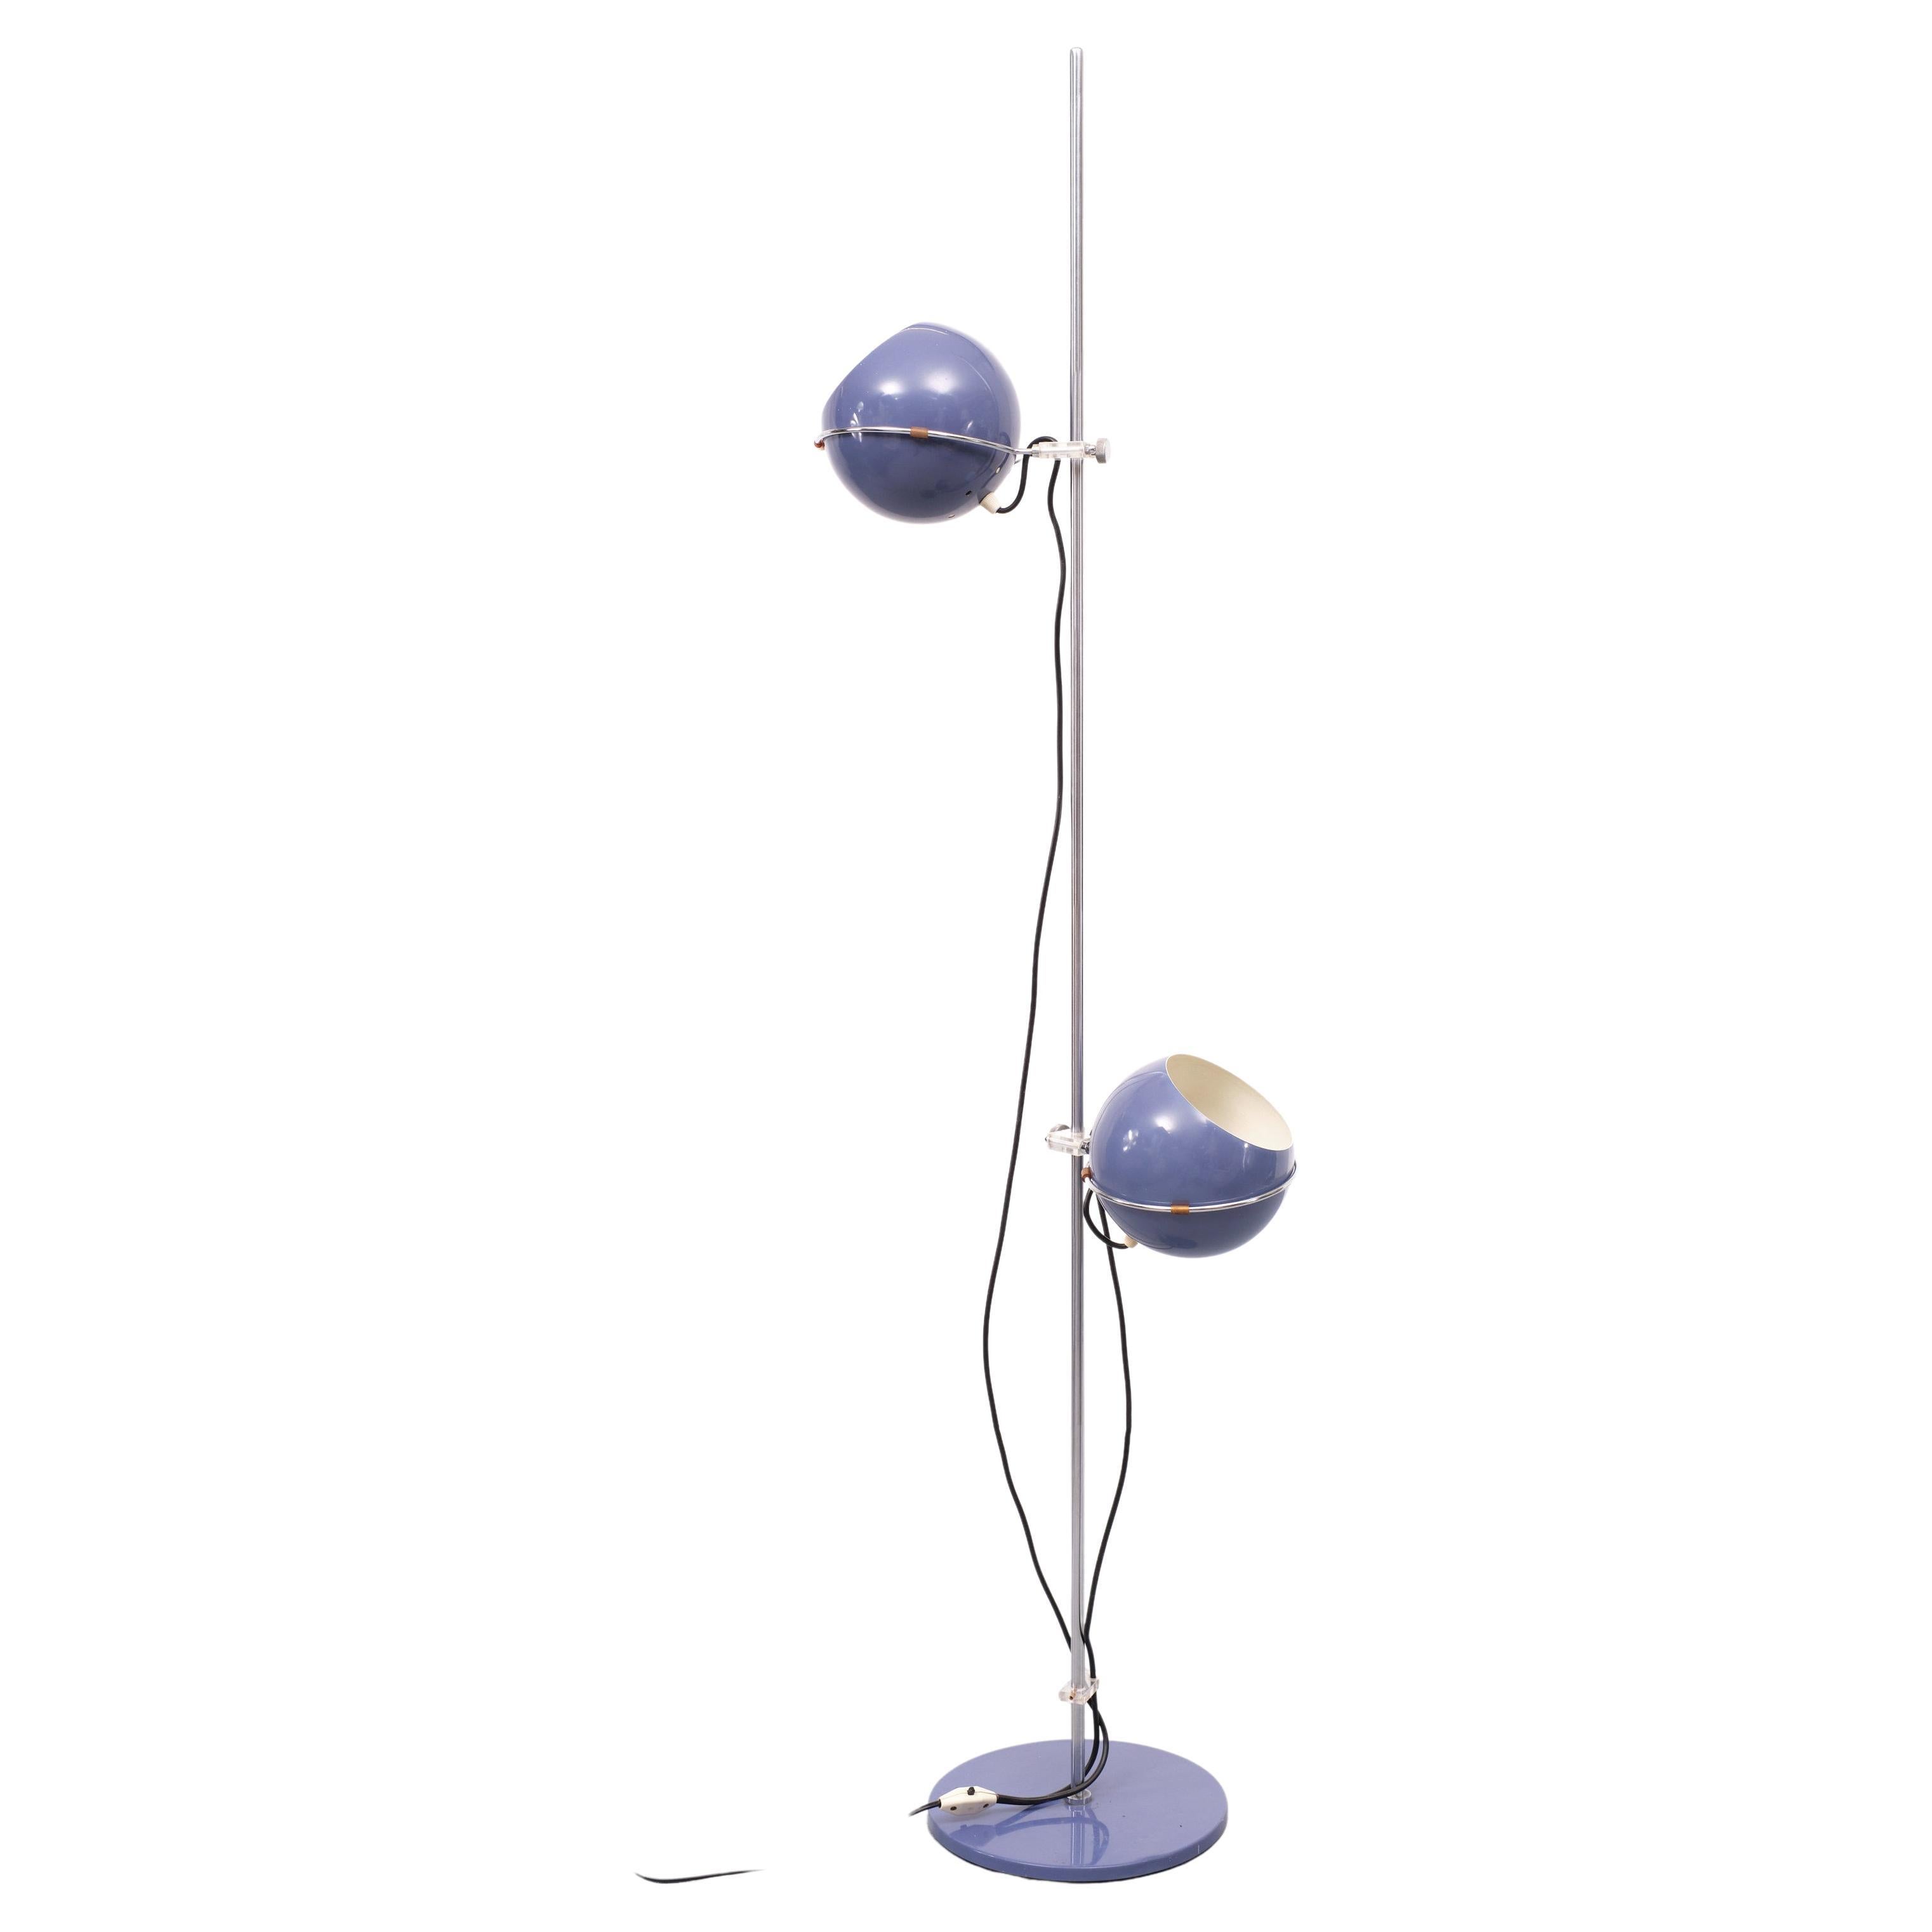 Gepo Floor Lamp  Sixties floor lamp designed by the brothers Postuma for the Dutch company Gepo. In a striking Purple color The ball-shaped caps are adjustable in height and can be turned up or down for direct or indirect lighting. Material: iron,